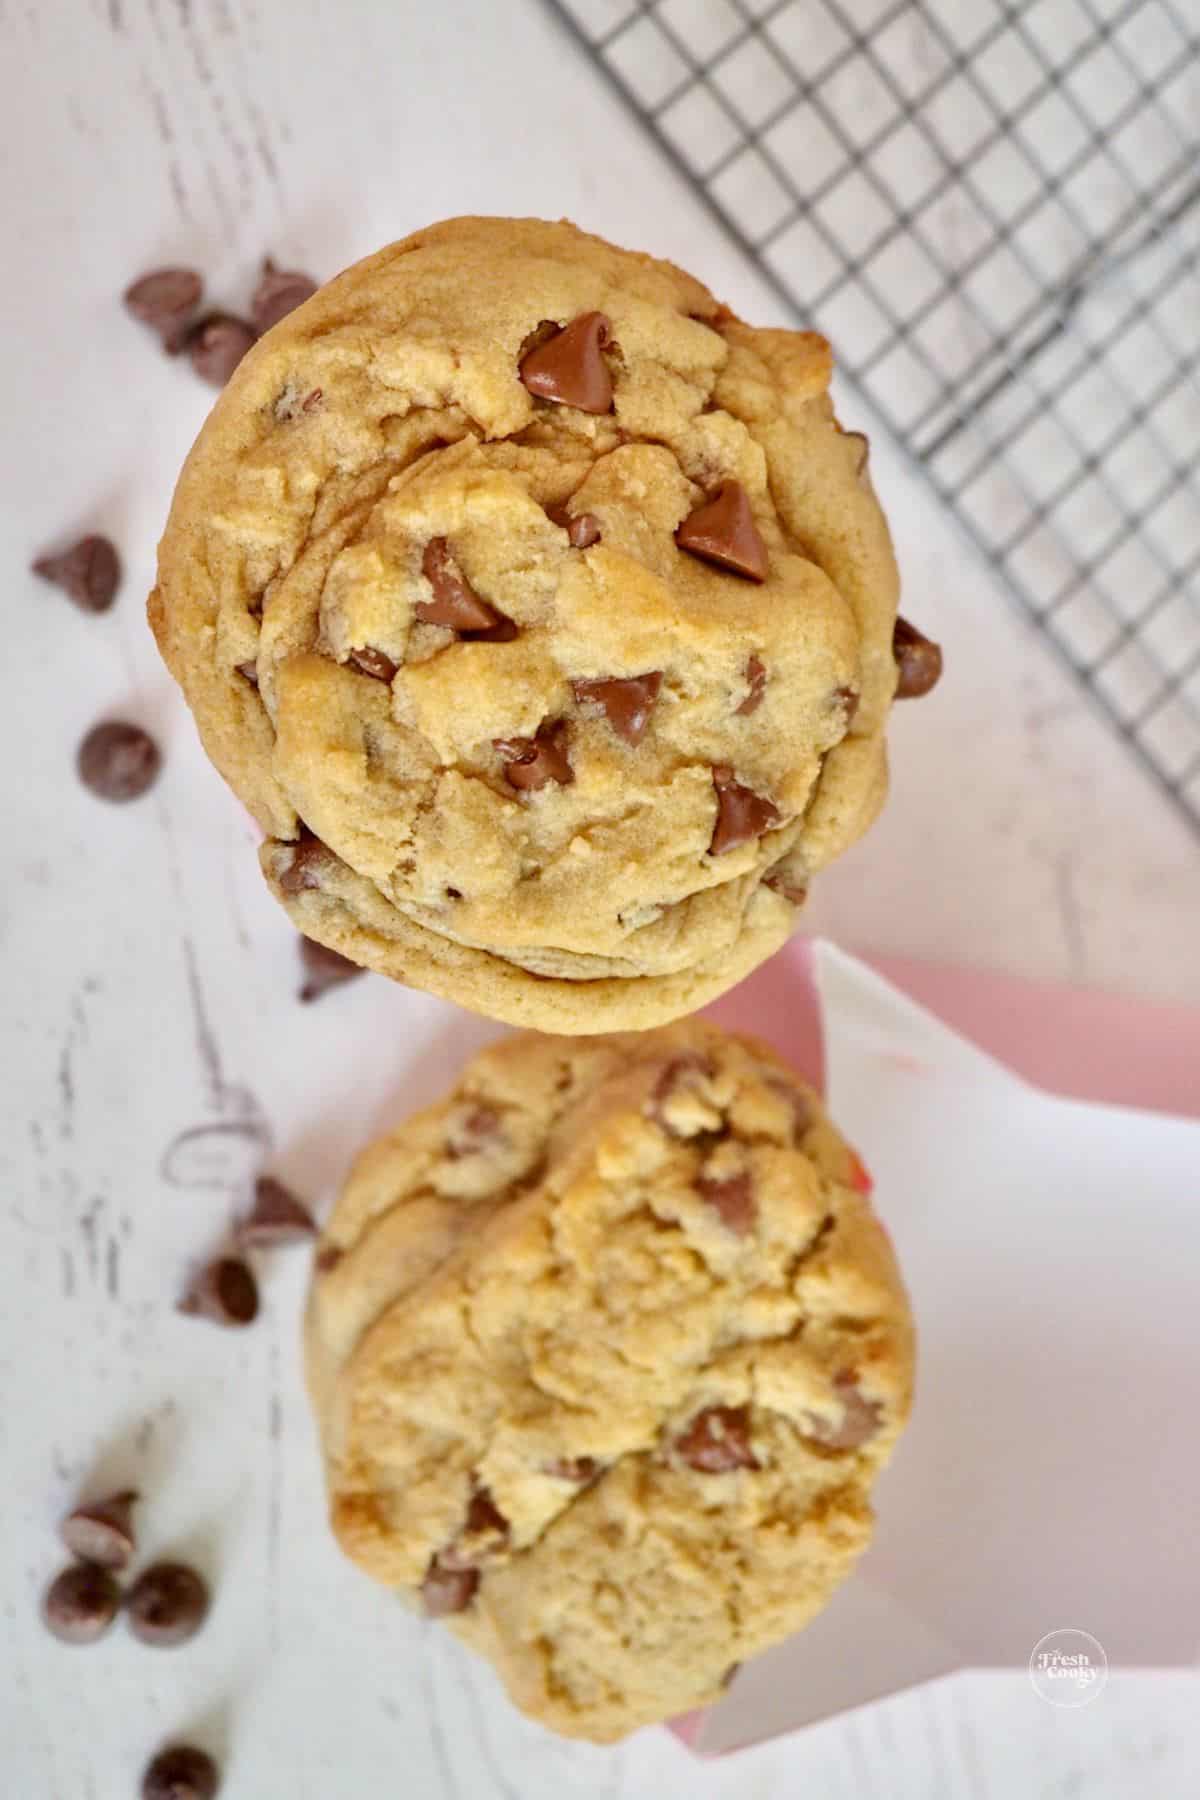 Best Copycat Crumbl Chocolate Chip Cookie Recipe - The Fresh Cooky